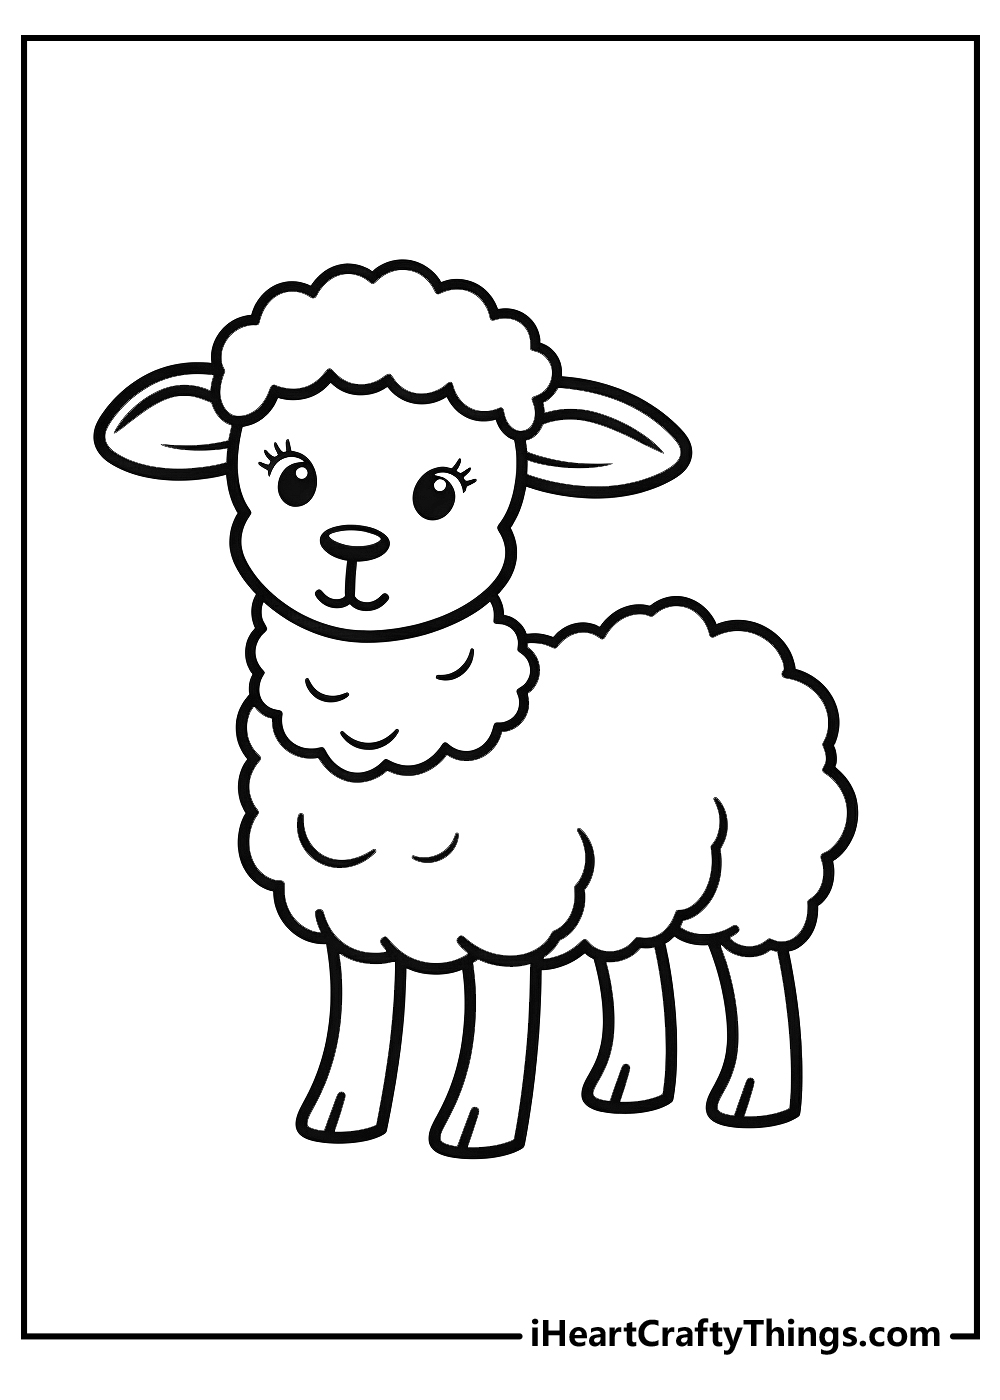 sheep coloring pages for kids